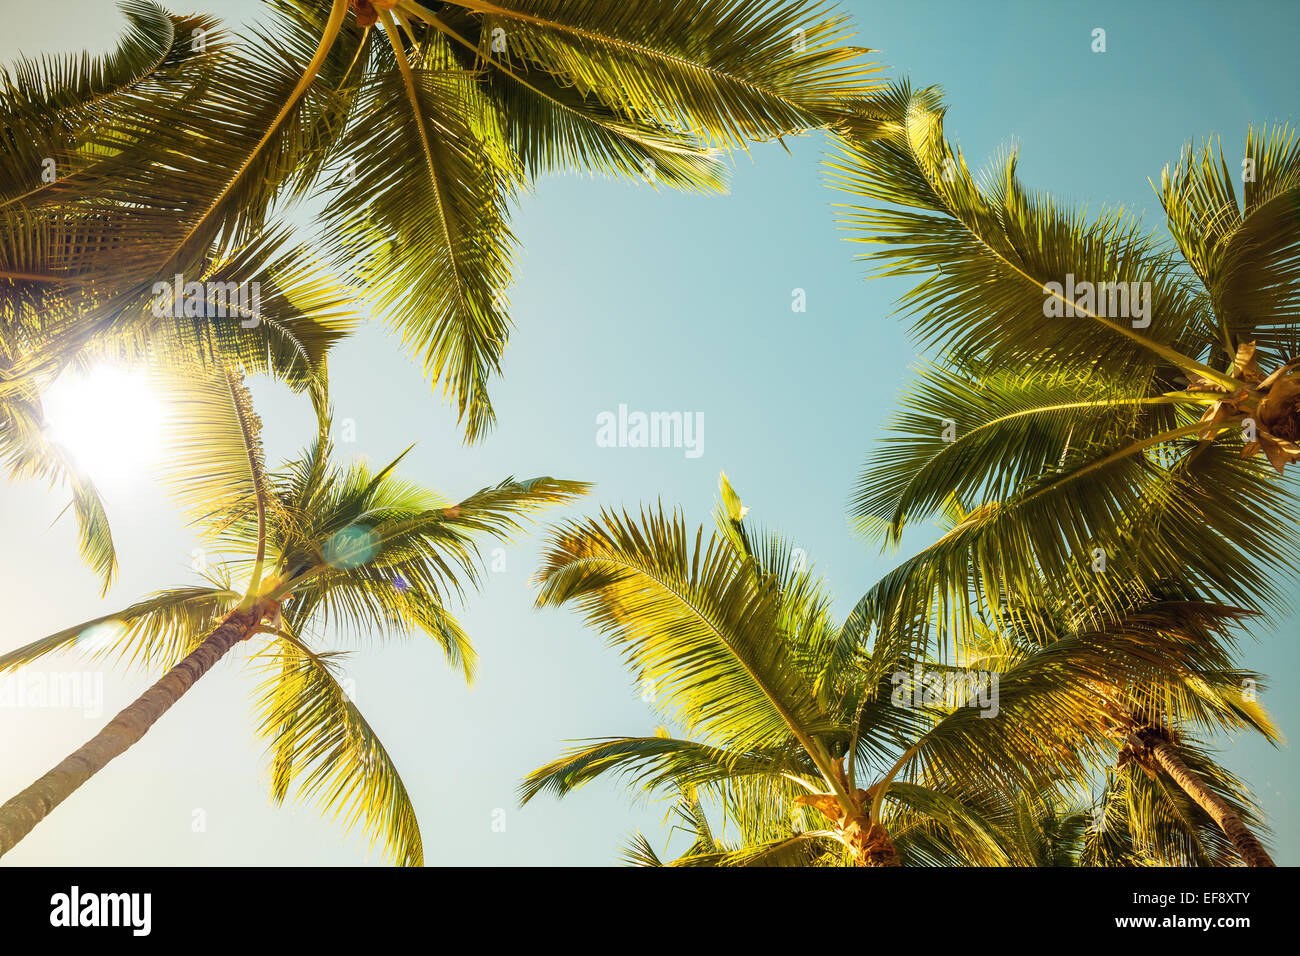 Coconut palm trees and shining sun over bright sky background. Vintage style. Toned photo with filter effect Stock Photo